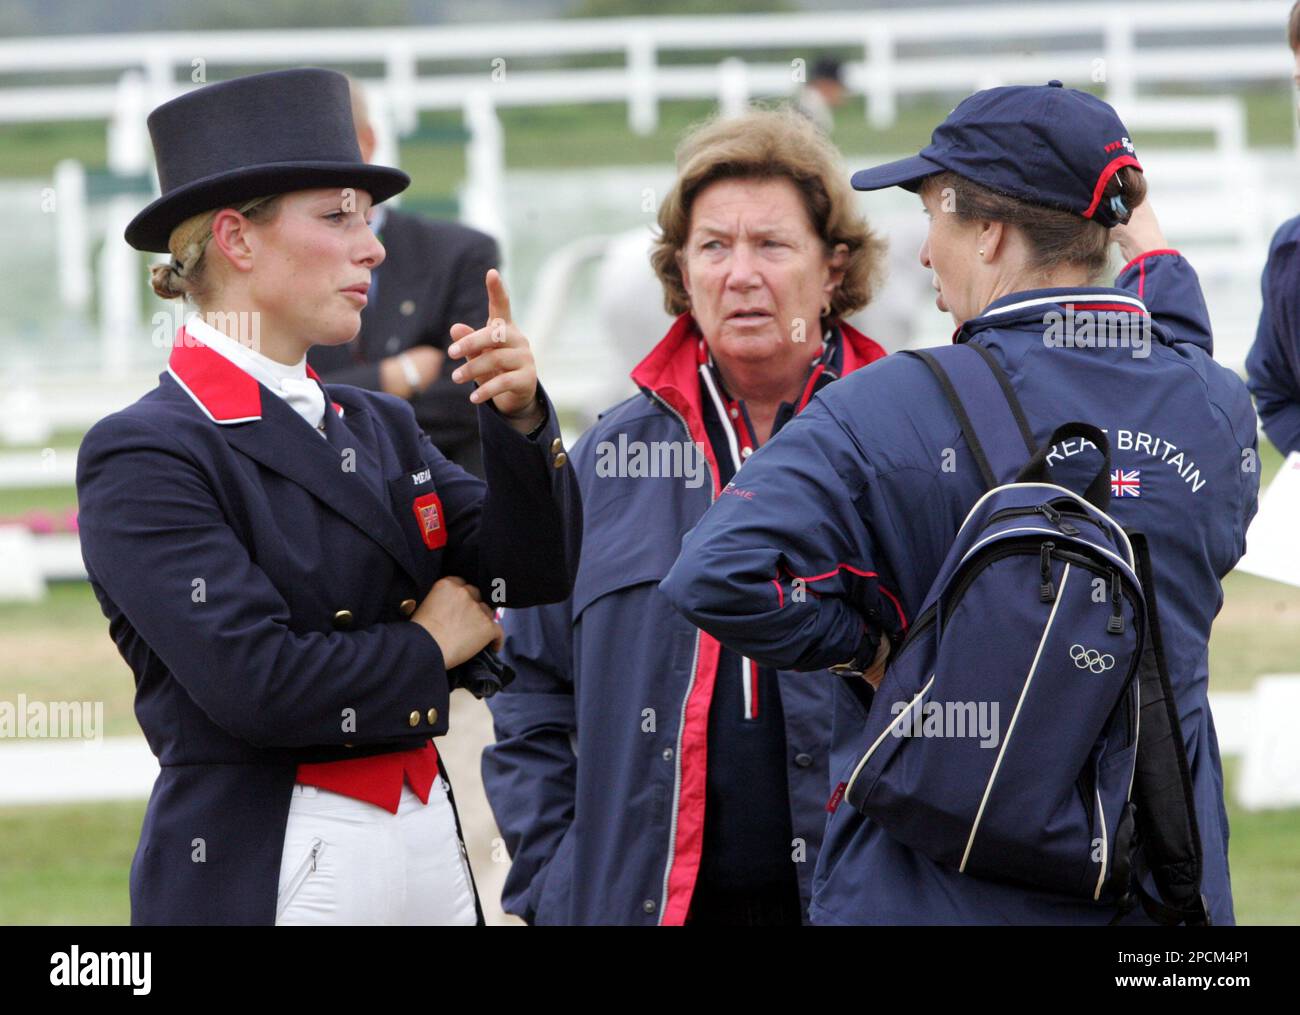 Zara Phillips, daughter of Princess Anne, plays with her pet dog on the  third day of the Gatcombe Park Festival of British Eventing at Gatcombe  Park, near Tetbury, England. Anwar Hussein/allactiondigital.com ***